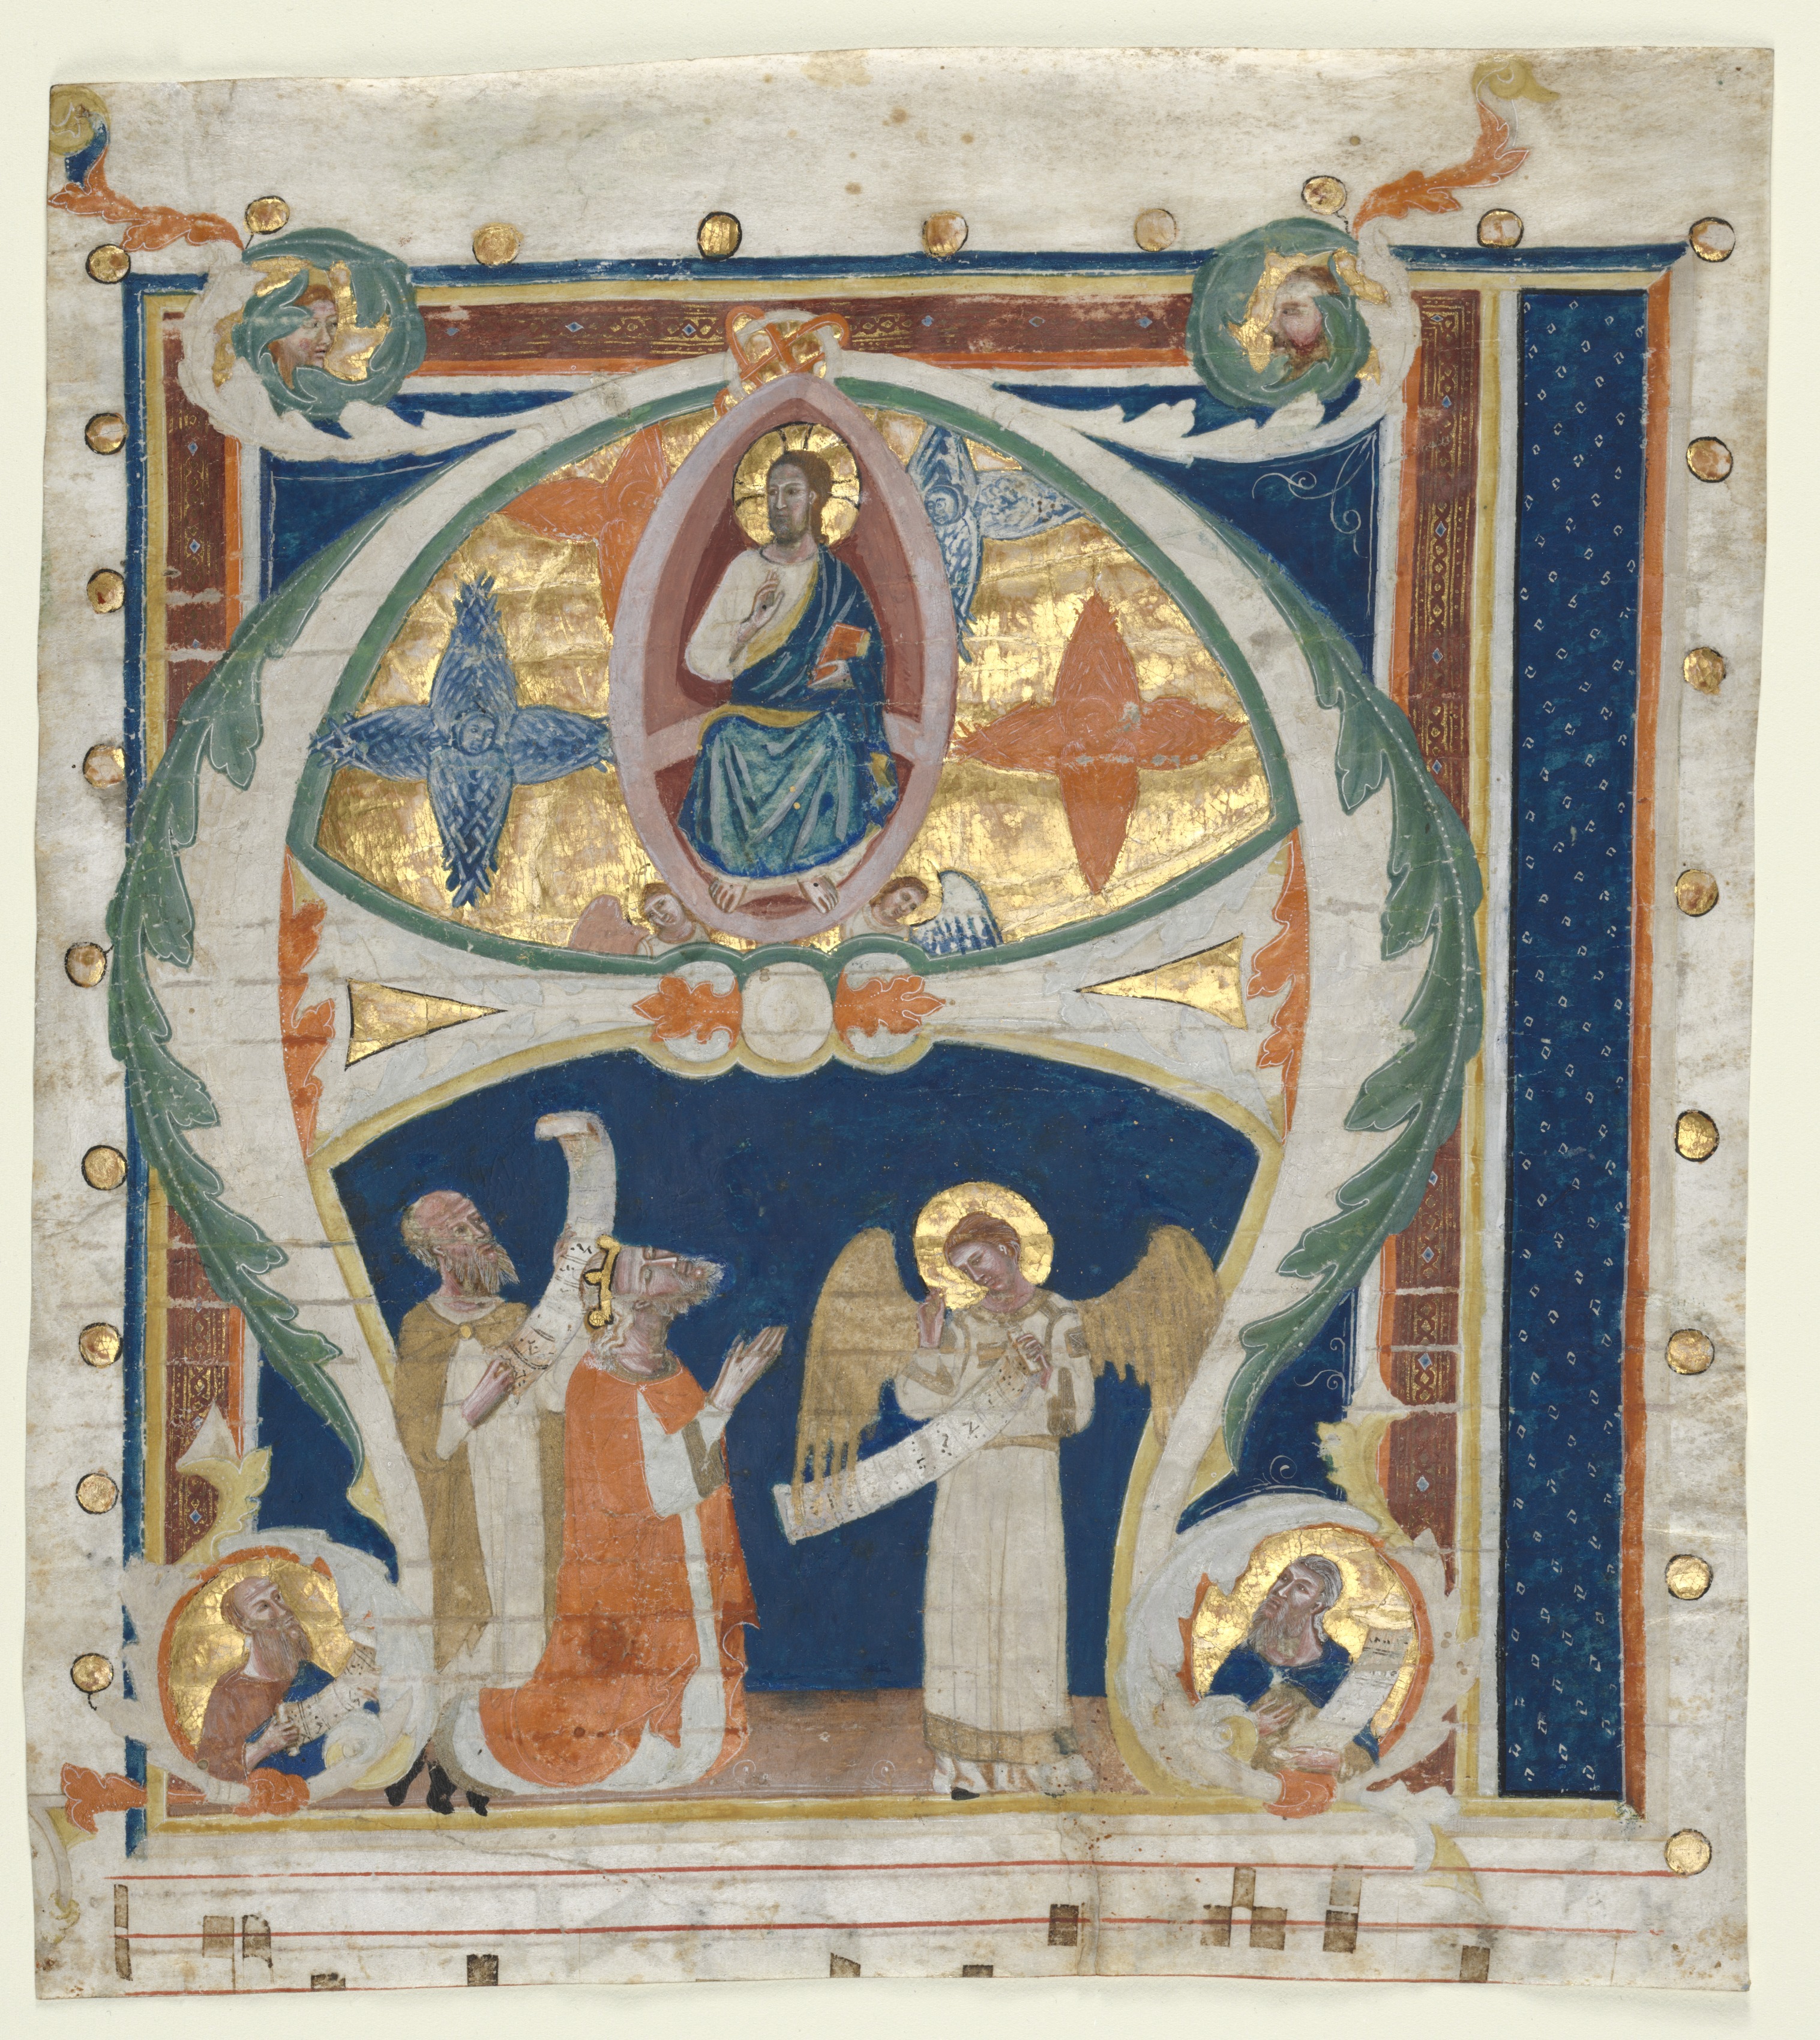 Historiated Initial (A) Excised from a Gradual: Christ in Majesty with King David and Prophets